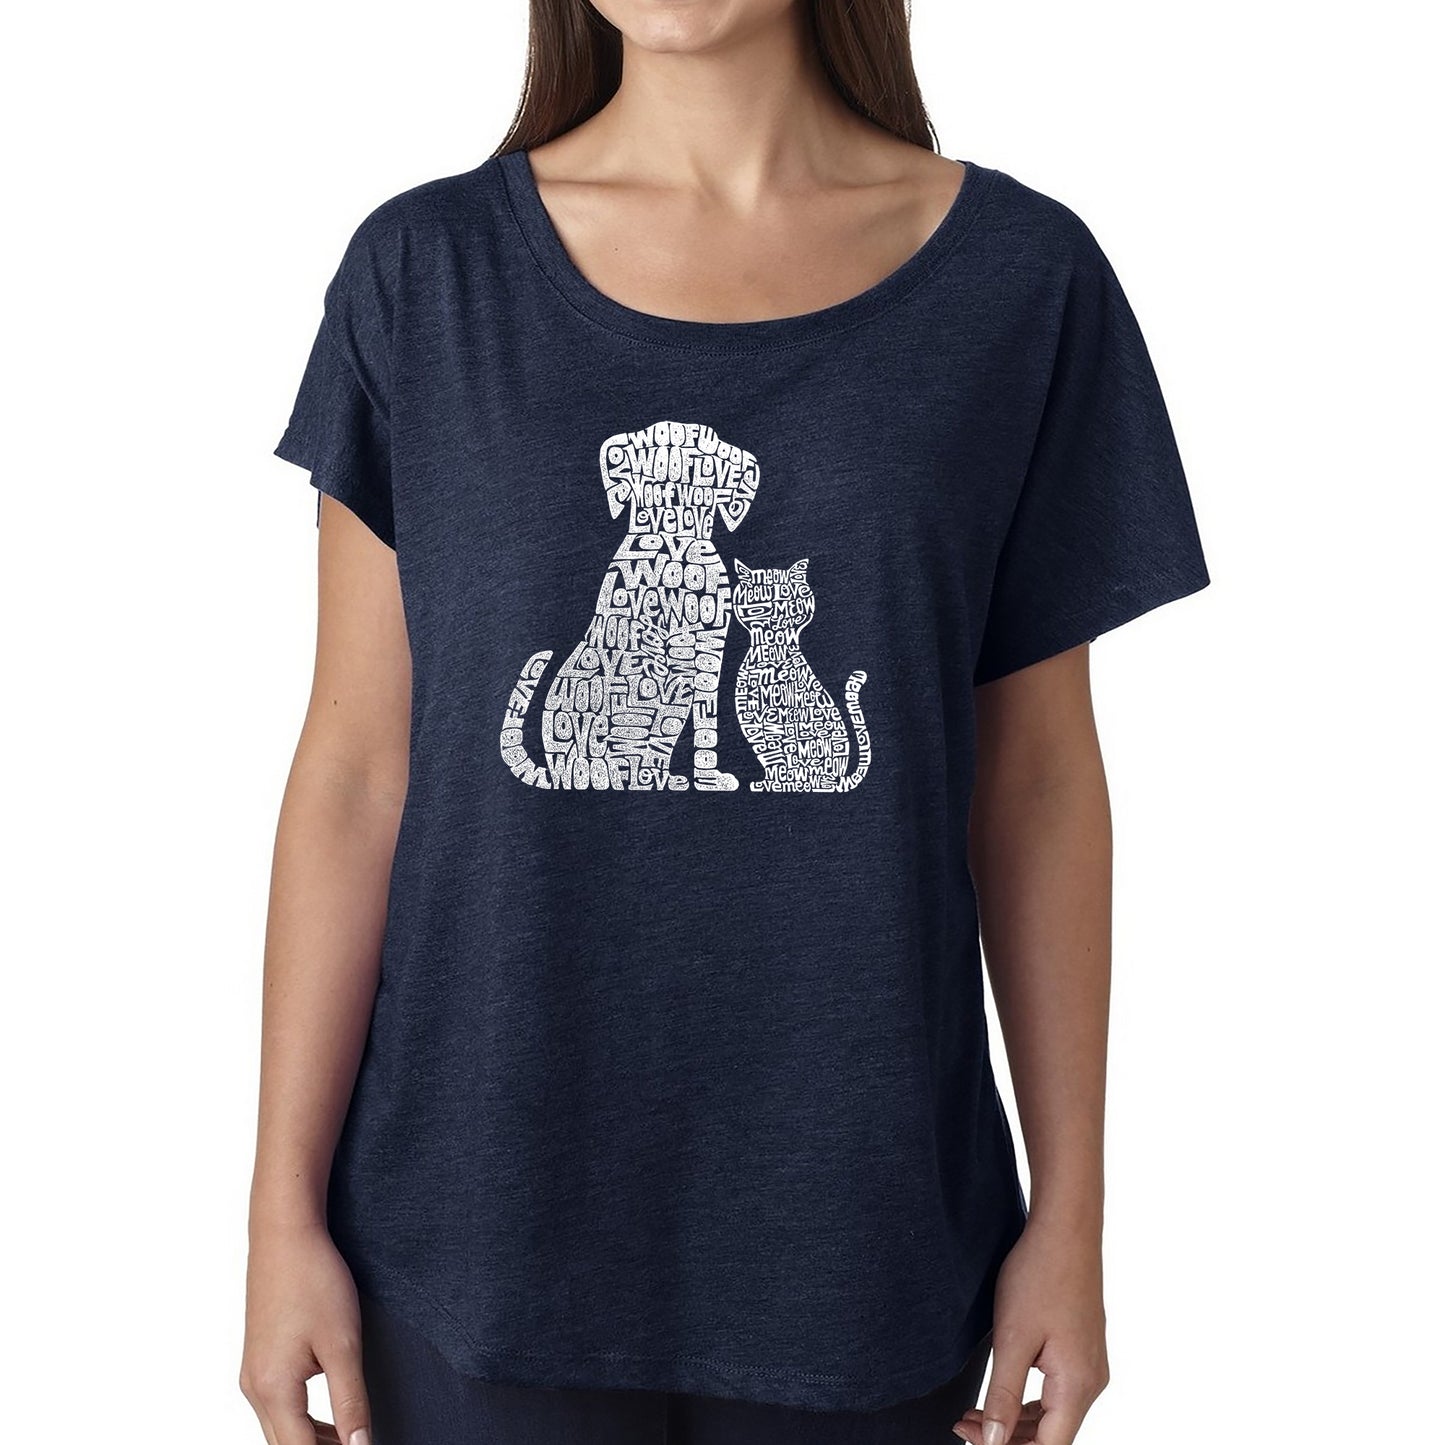 Dogs and Cats  - Women's Loose Fit Dolman Cut Word Art Shirt